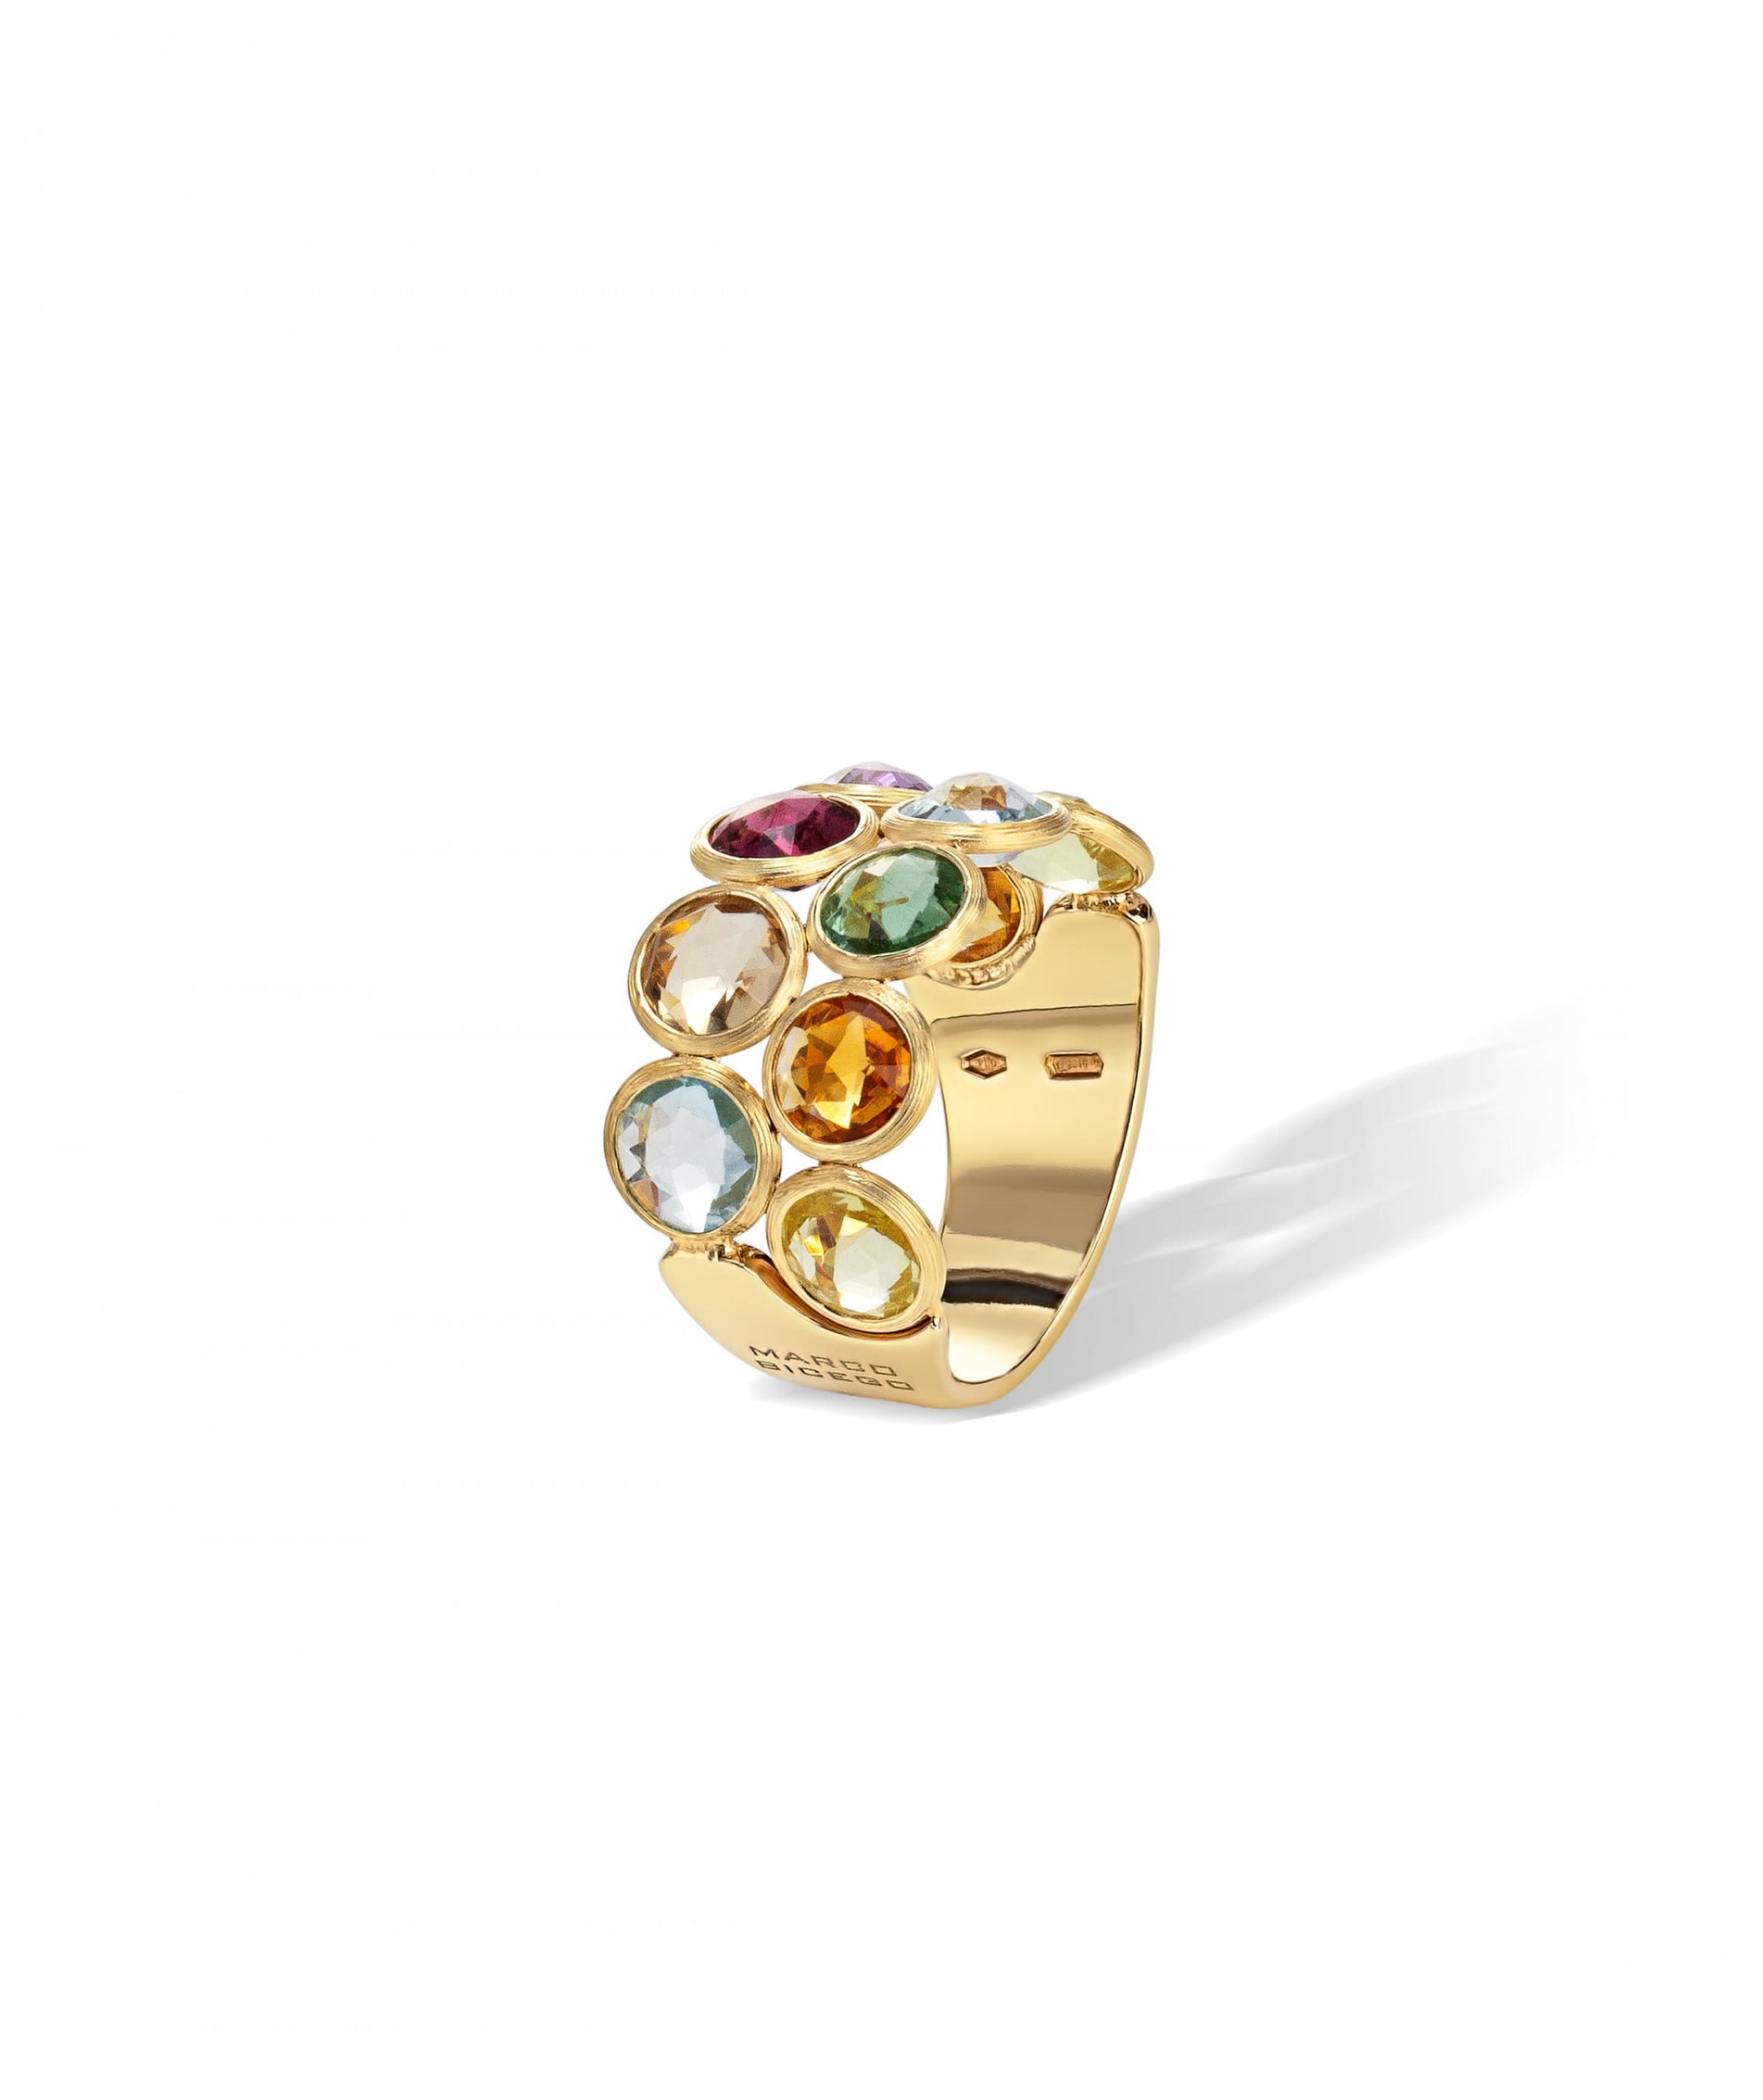 Jaipur Colour Ring in 18k Yellow Gold with Double Band of Multicoloured Gemstones - Orsini Jewellers NZ